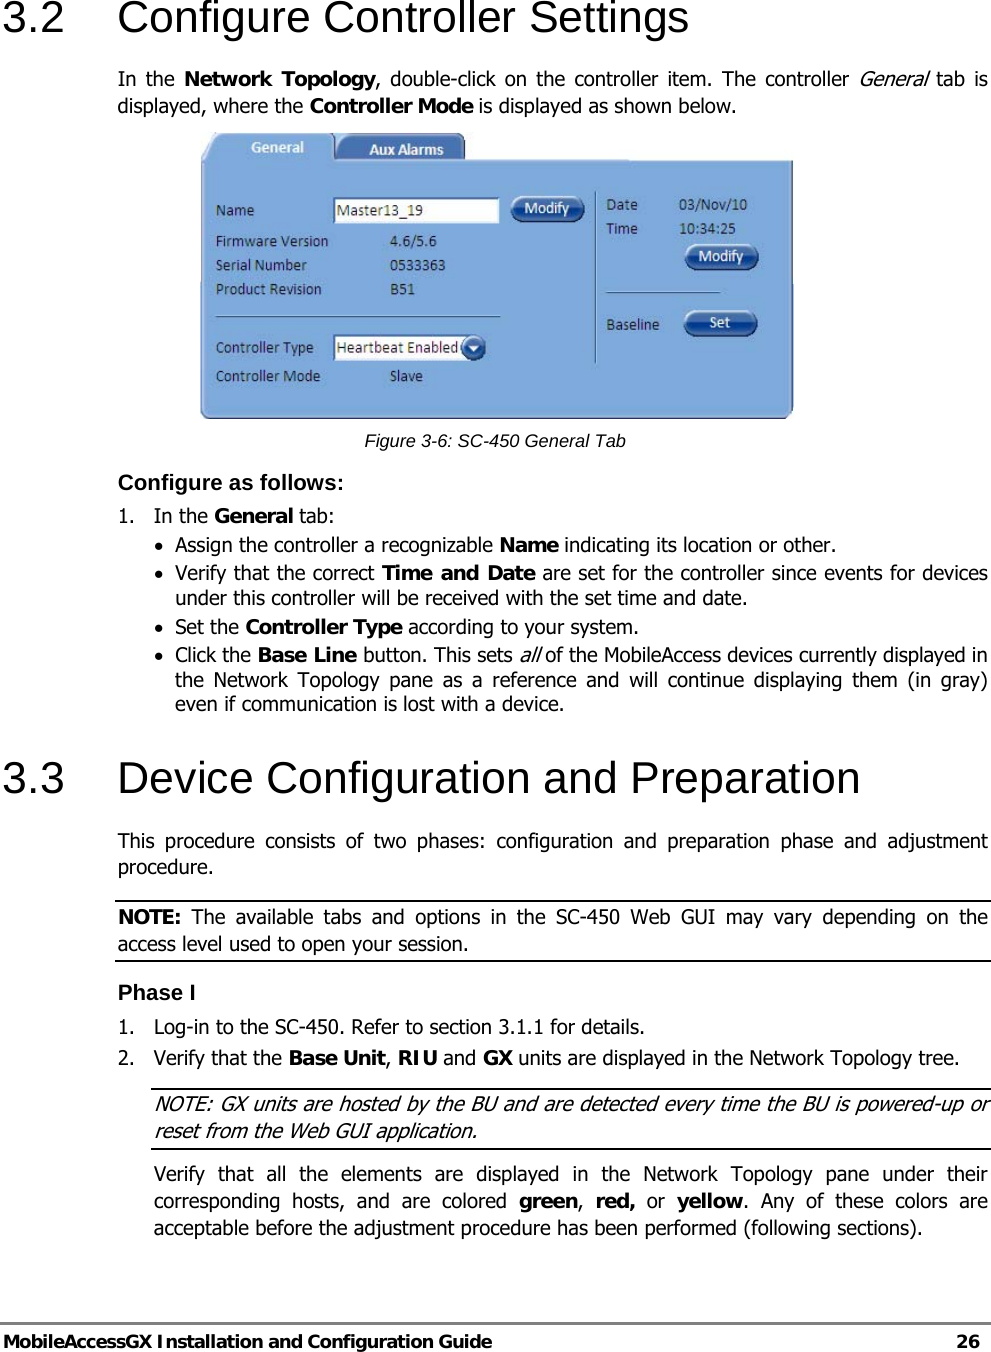   MobileAccessGX Installation and Configuration Guide   26  3.2 Configure Controller Settings In the Network Topology, double-click on the controller item. The controller General tab is displayed, where the Controller Mode is displayed as shown below.  Figure 3-6: SC-450 General Tab Configure as follows: 1. In the General tab: • Assign the controller a recognizable Name indicating its location or other.  • Verify that the correct Time and Date are set for the controller since events for devices under this controller will be received with the set time and date. • Set the Controller Type according to your system. • Click the Base Line button. This sets all of the MobileAccess devices currently displayed in the Network Topology pane as a reference and will continue displaying them (in gray) even if communication is lost with a device. 3.3  Device Configuration and Preparation This procedure consists of two phases: configuration and preparation phase and adjustment procedure. NOTE: The available tabs and options in the SC-450 Web GUI may vary depending on the access level used to open your session. Phase I 1.  Log-in to the SC-450. Refer to section 3.1.1 for details. 2. Verify that the Base Unit, RIU and GX units are displayed in the Network Topology tree. NOTE: GX units are hosted by the BU and are detected every time the BU is powered-up or reset from the Web GUI application. Verify that all the elements are displayed in the Network Topology pane under their corresponding hosts, and are colored green,  red, or yellow. Any of these colors are acceptable before the adjustment procedure has been performed (following sections). 